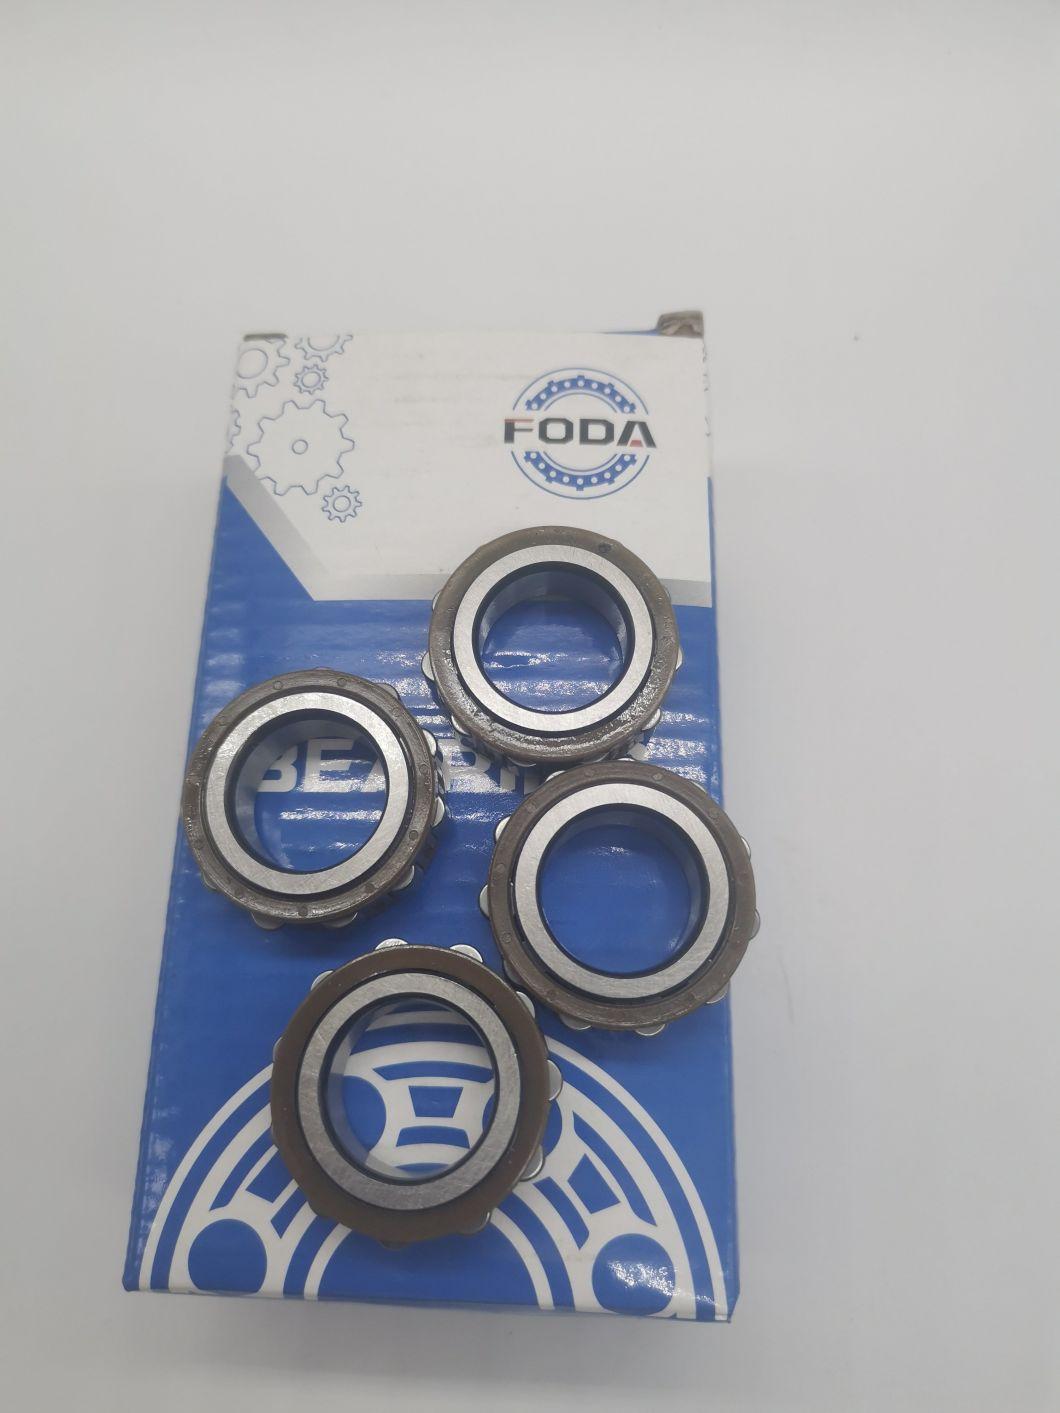 Double Row Eccentric Bearing / Cylindrical Roller Bearing (22UZ8311 RN1010 RN1012 RN1014 RN1016 RV1018 RN1020 RN1024 RN202 RN203 RN204 RN205 RN206 RN207 RN208)